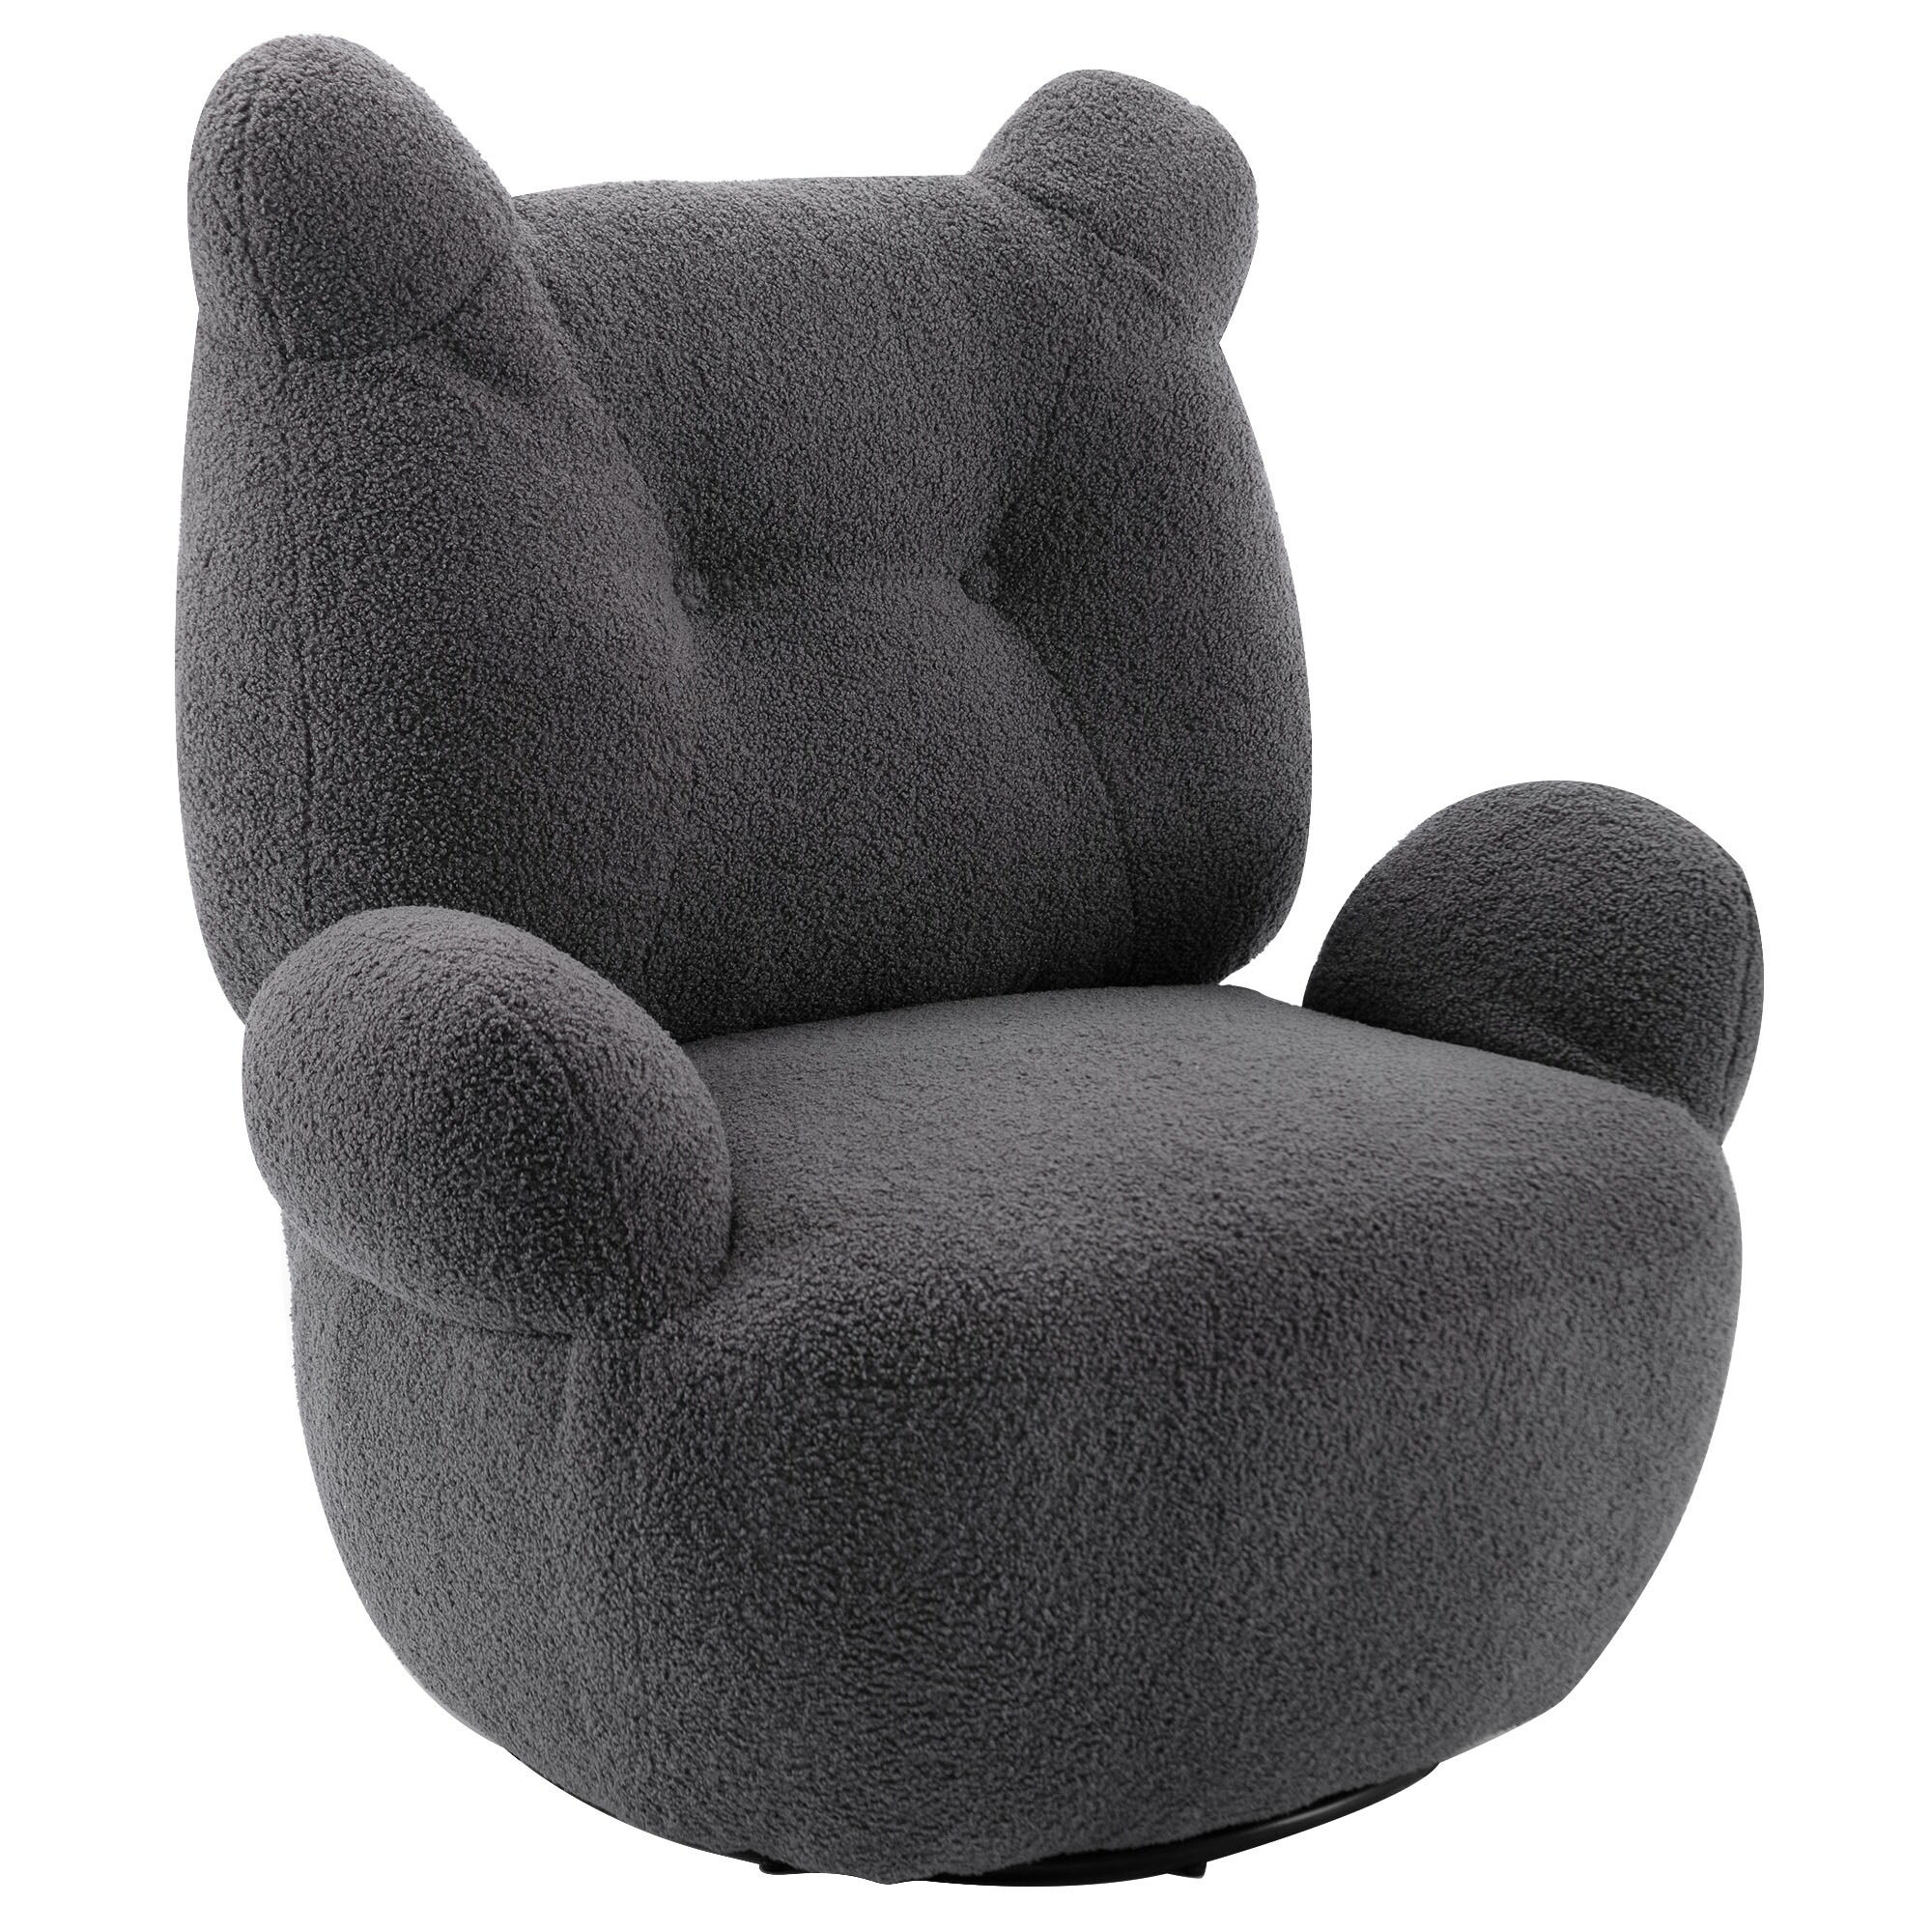 https://ak1.ostkcdn.com/images/products/is/images/direct/bddfa34bdc779fdd2857fbdc5aca7c9bbce37ba8/Children%27s-style-Swivel-Barrel-Accent-Chair%2C-Teddy-Short-Plush-Particle-Velvet-Armchair-for-Living-Room%2C-Hotel%2C-Bedroom%2CLounge.jpg